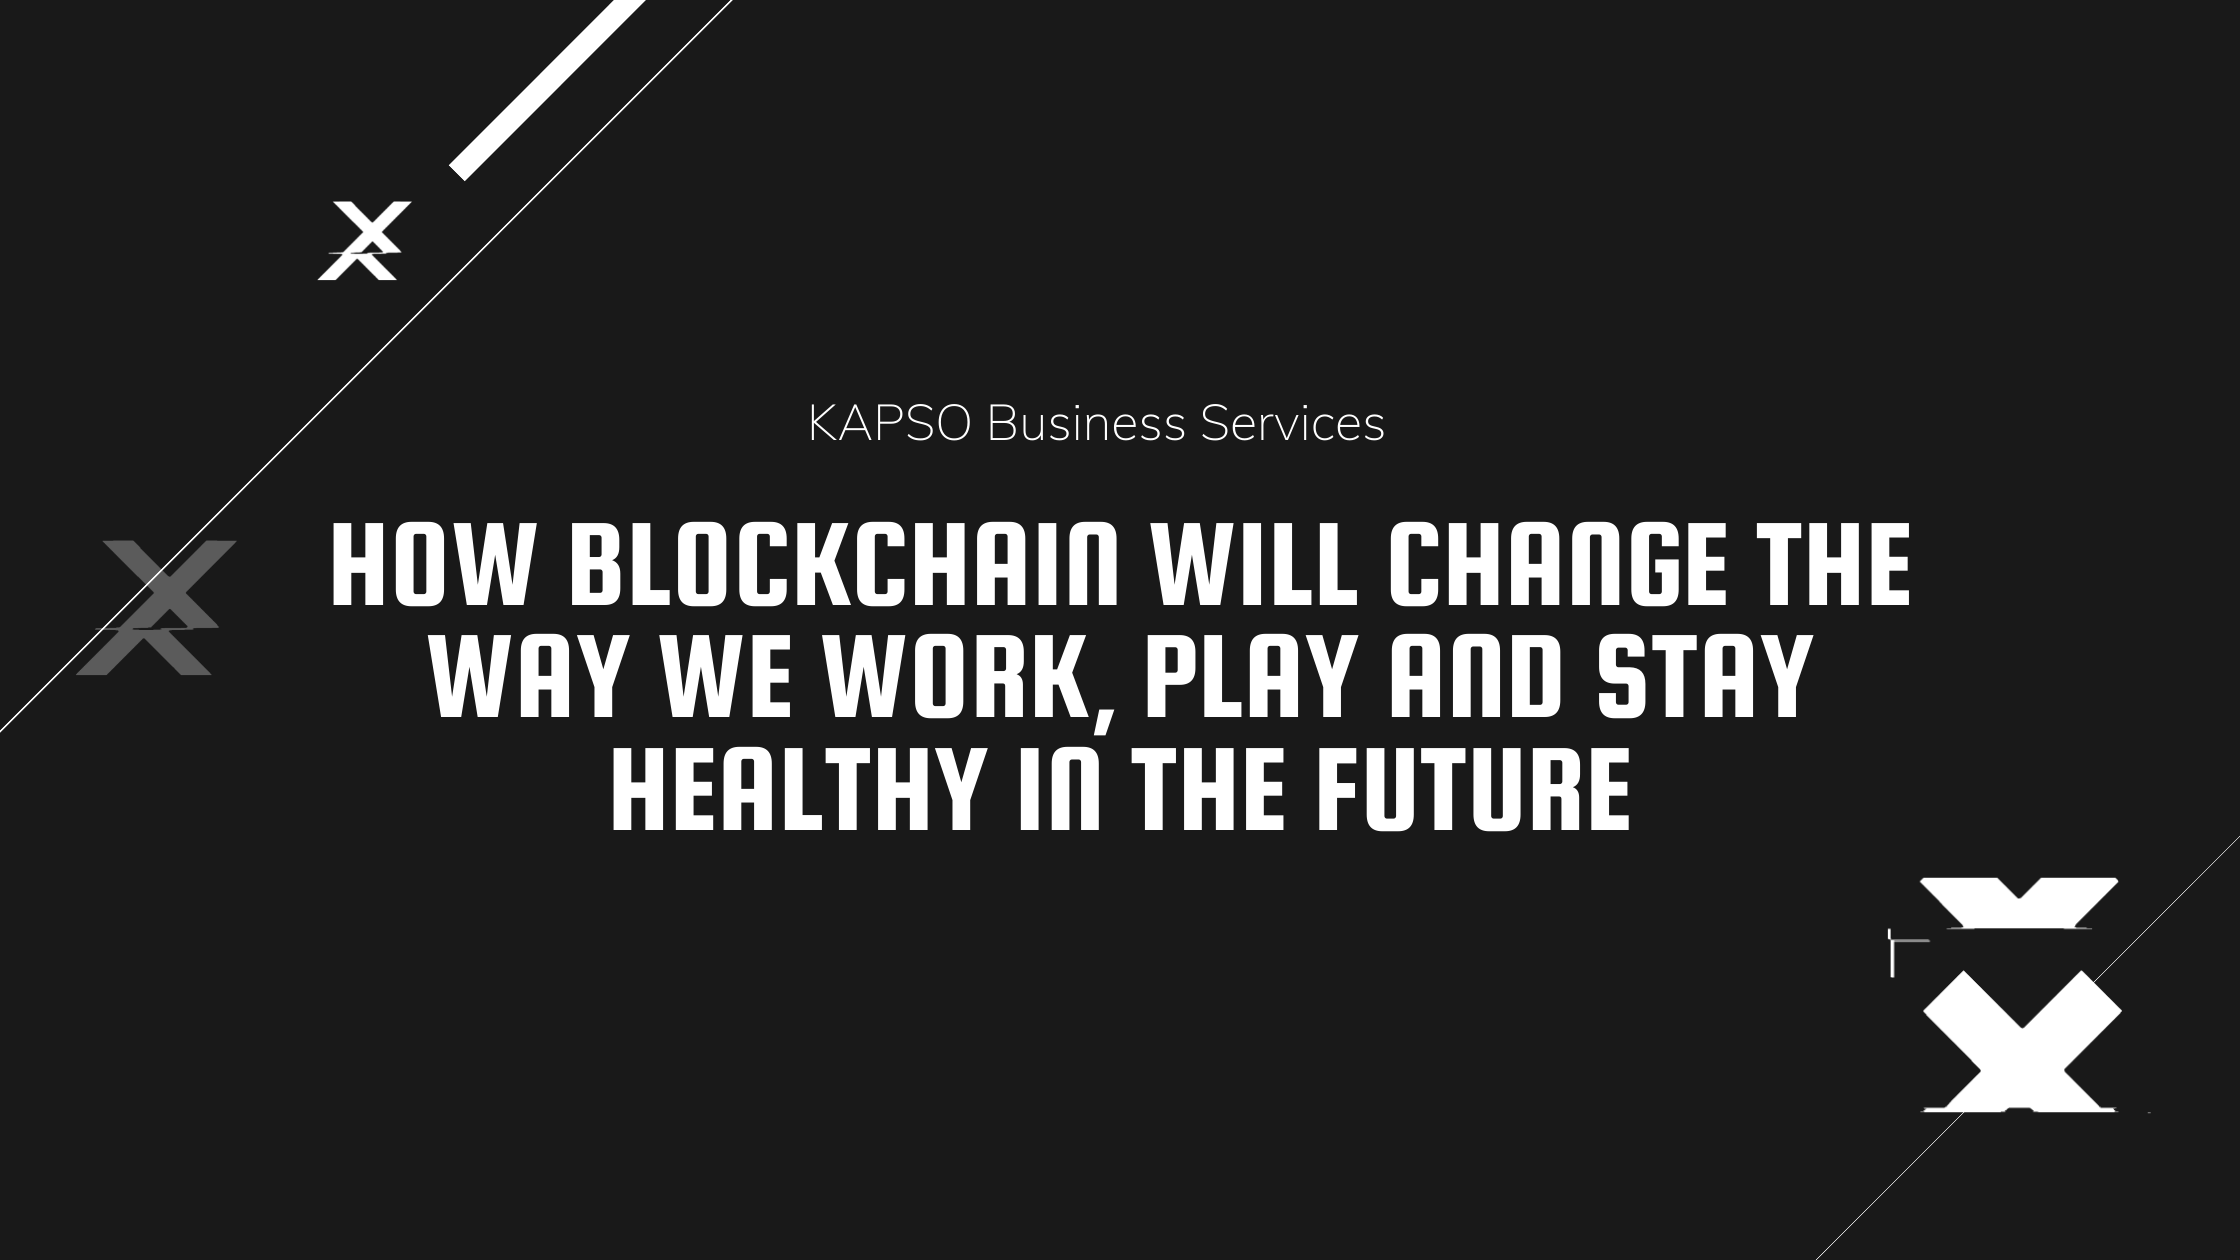 How Blockchain Will Change the Way We Work, Play and Stay Healthy in the Future